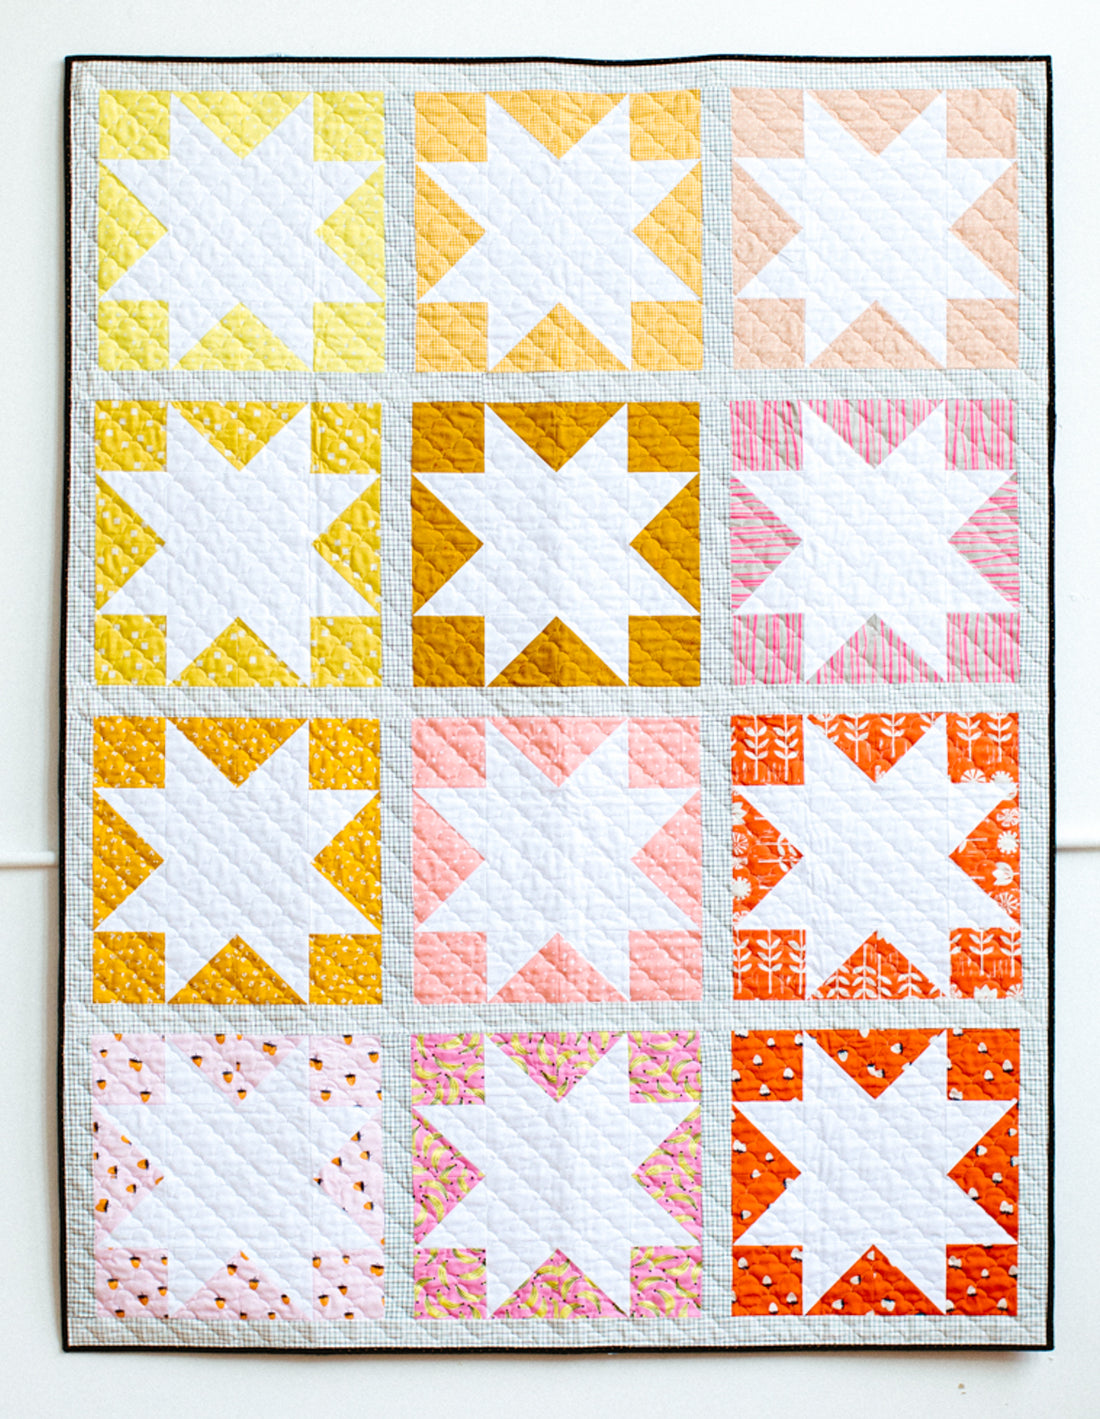 Inside Out Star Quilt - the Scrappy One and my summer burnout